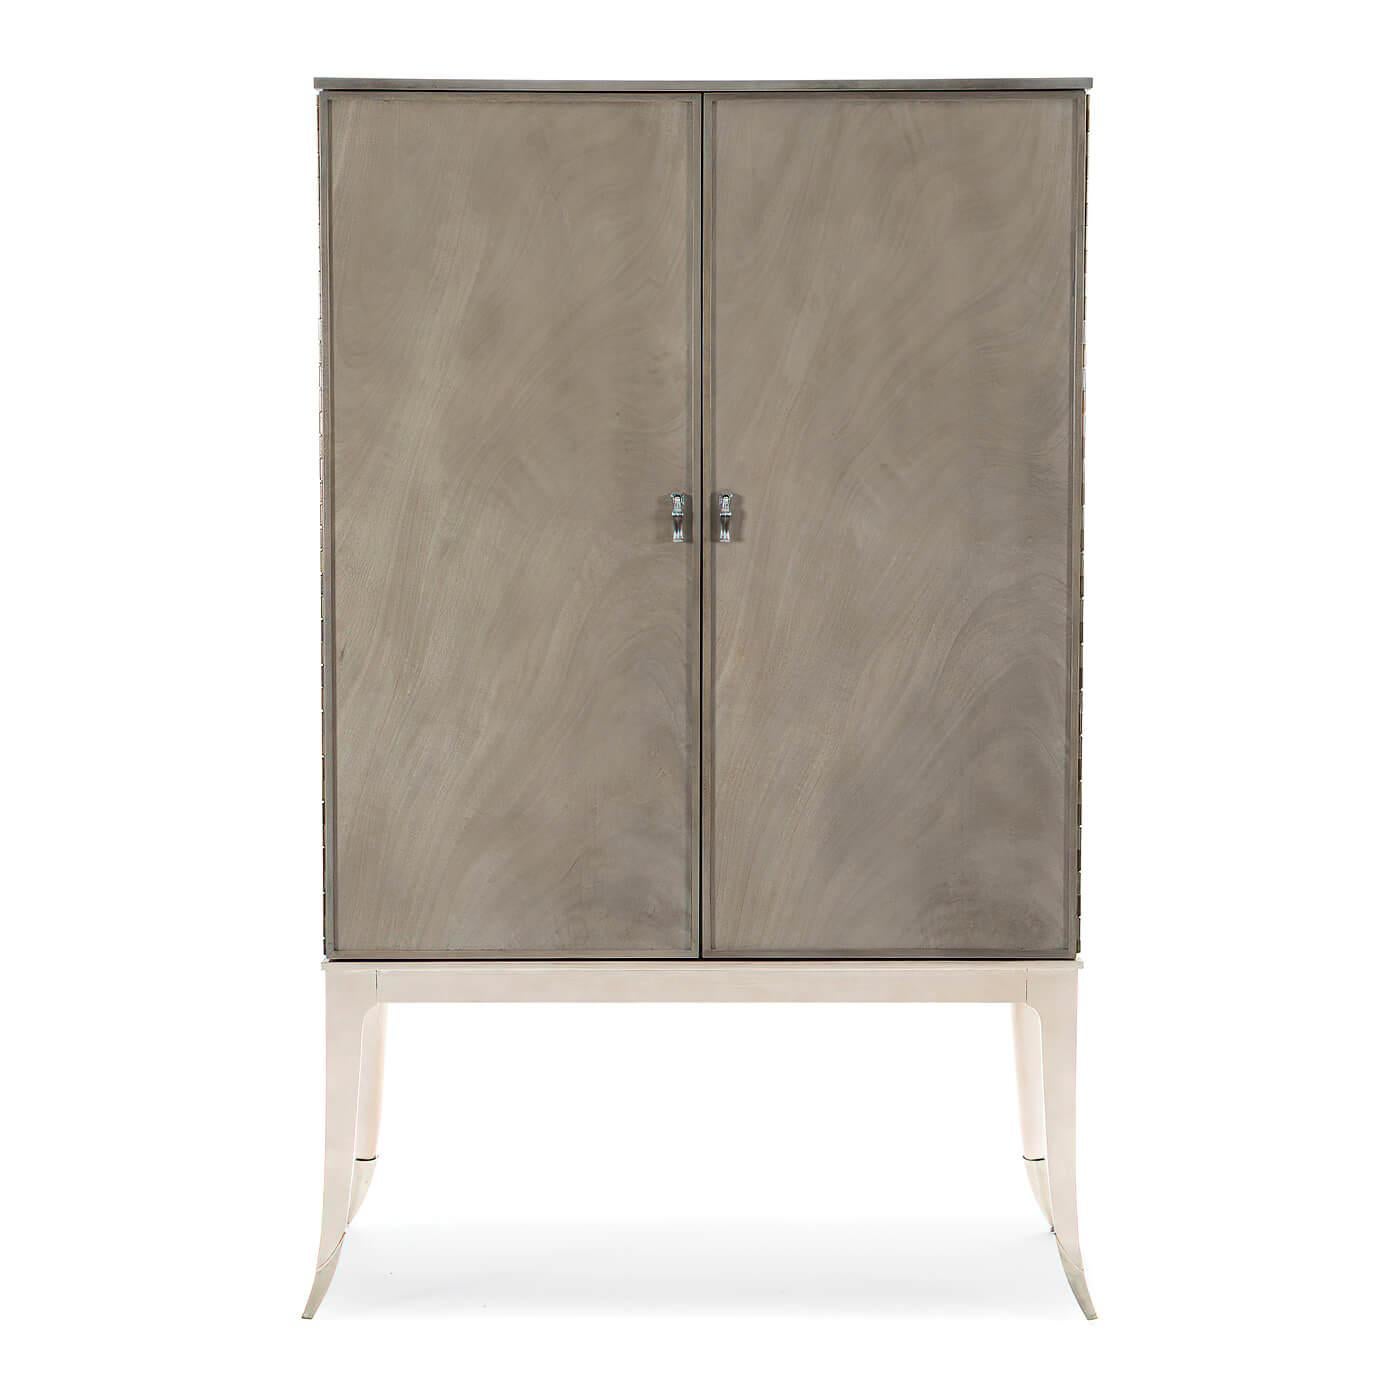 A contemporary silver two-door bar cabinet with splayed legs in silver leaf with metal ferrules in lightly brushed chrome. The case has been given our silver fox finish and has a silver-painted interior. The two doors with piano hinges.

Inside it